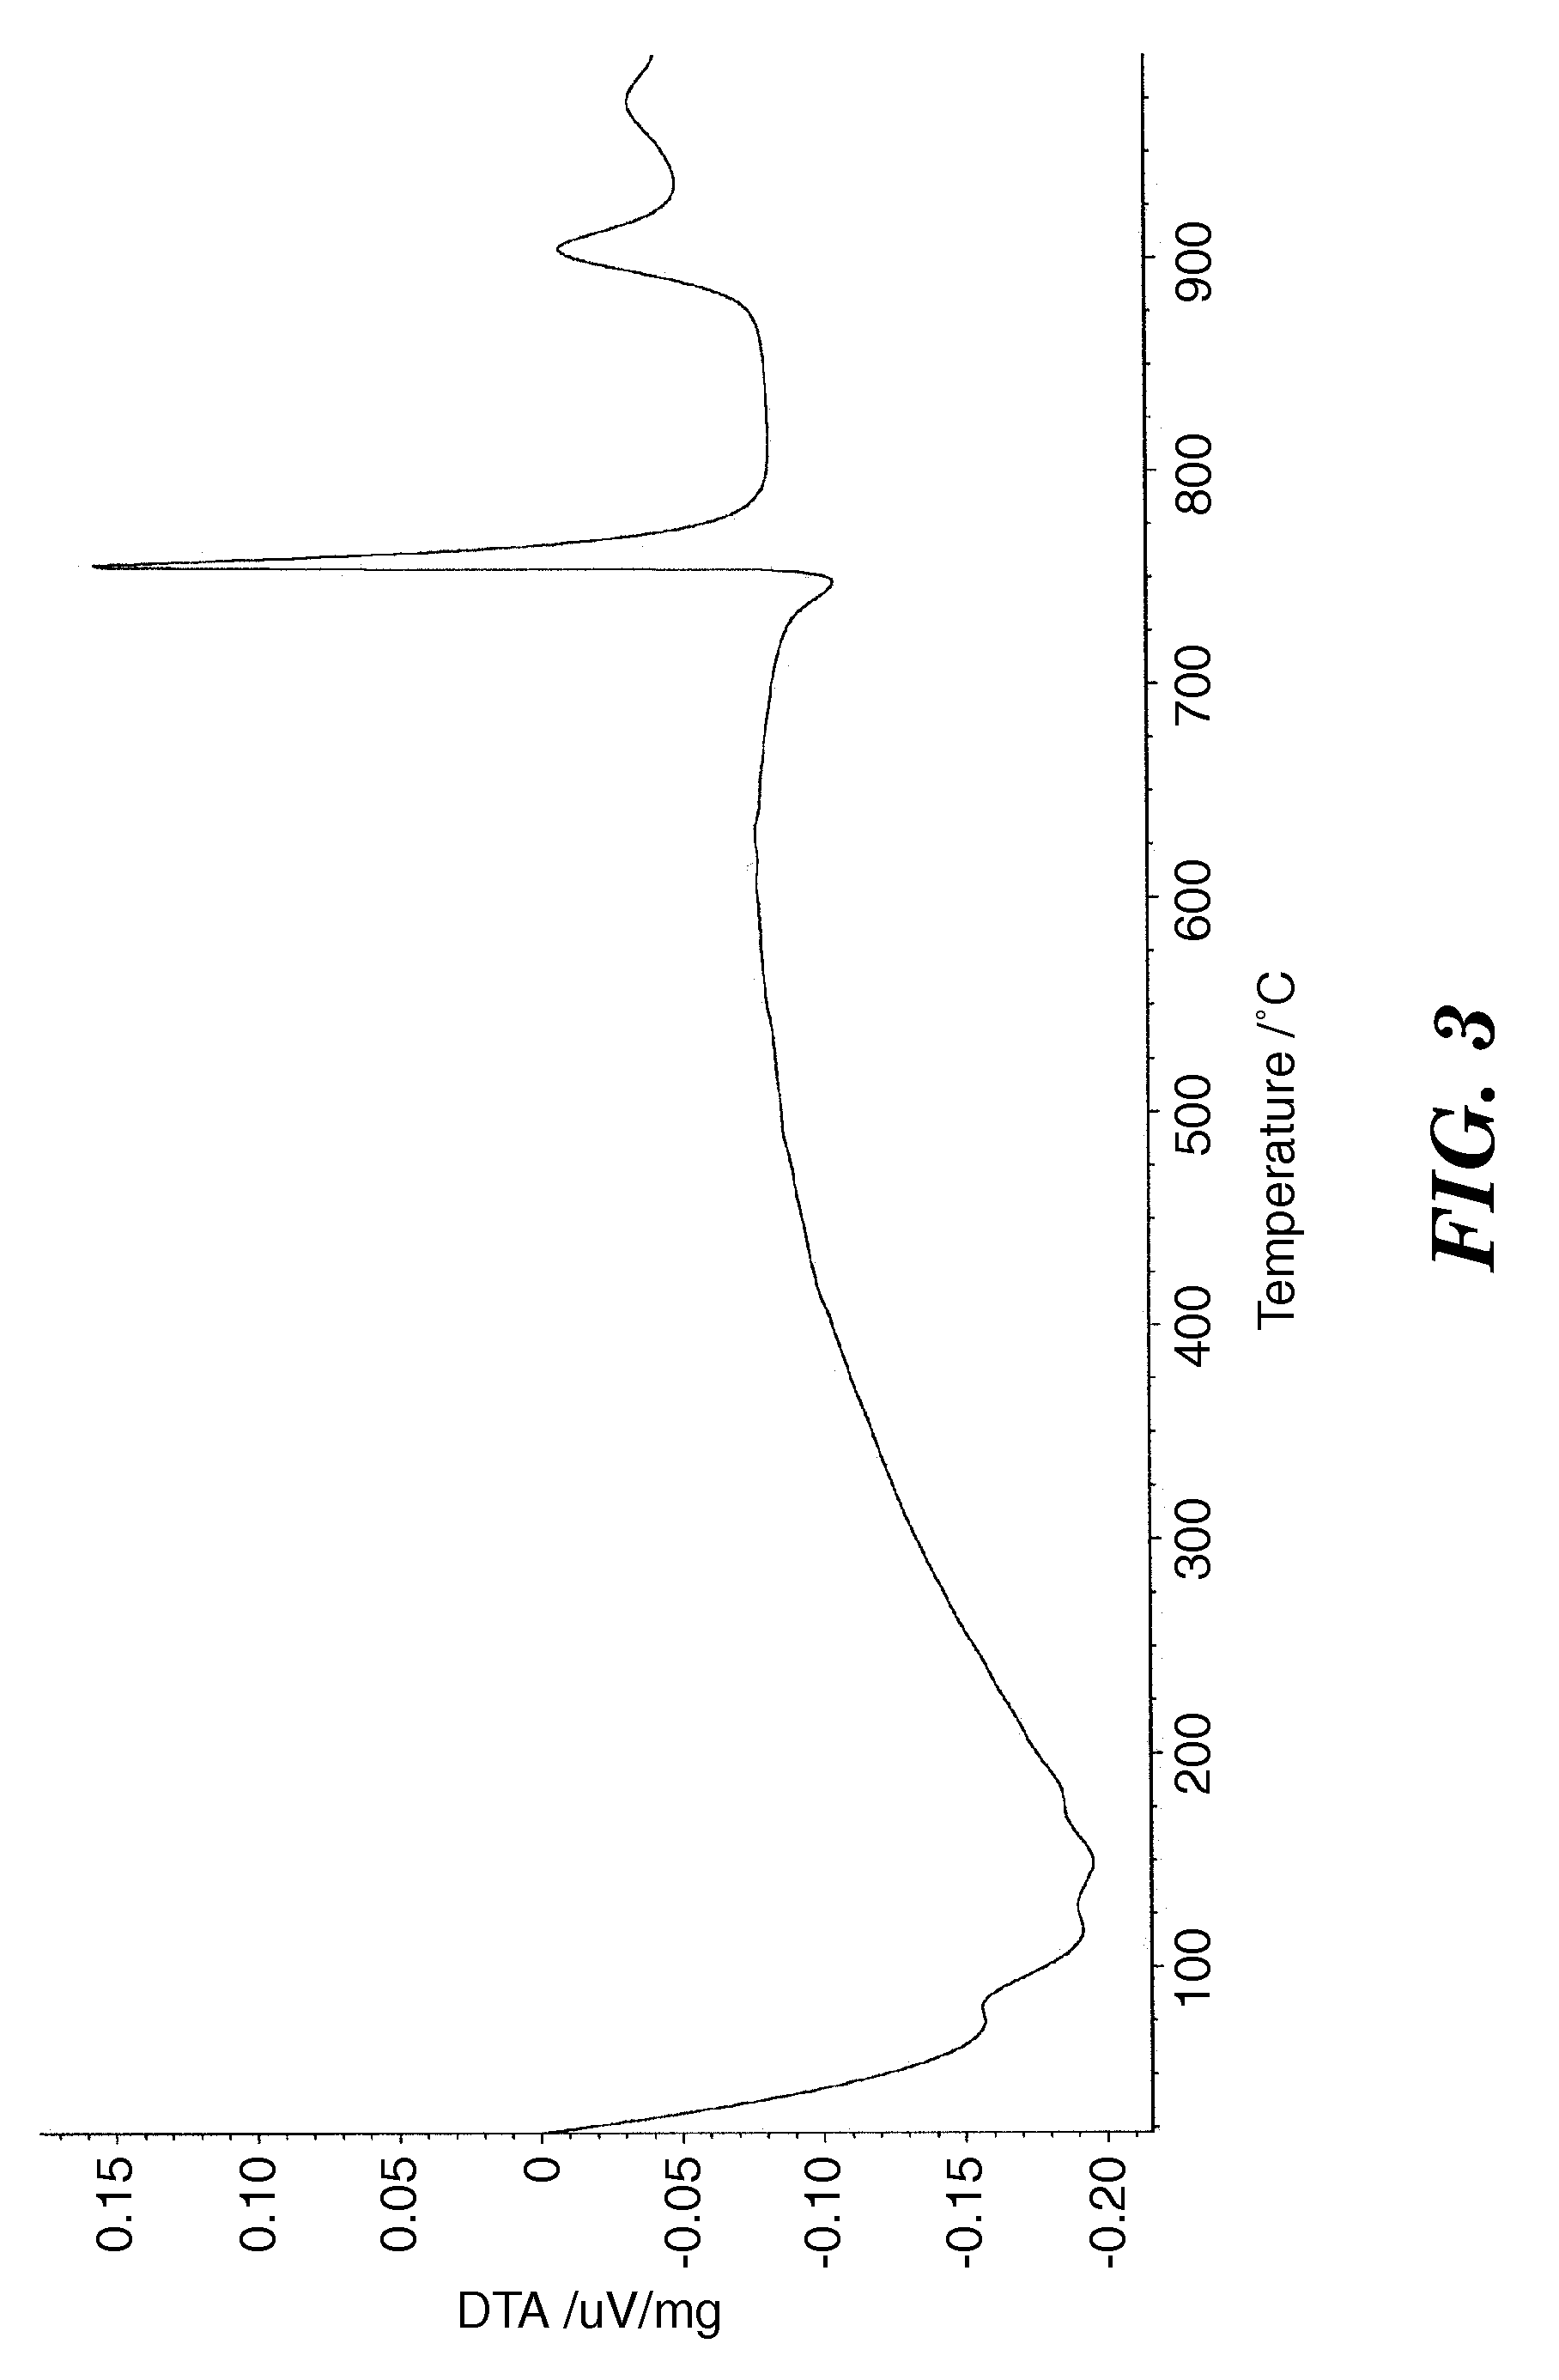 Method and article from aluminum oxide glass and articles made therefrom